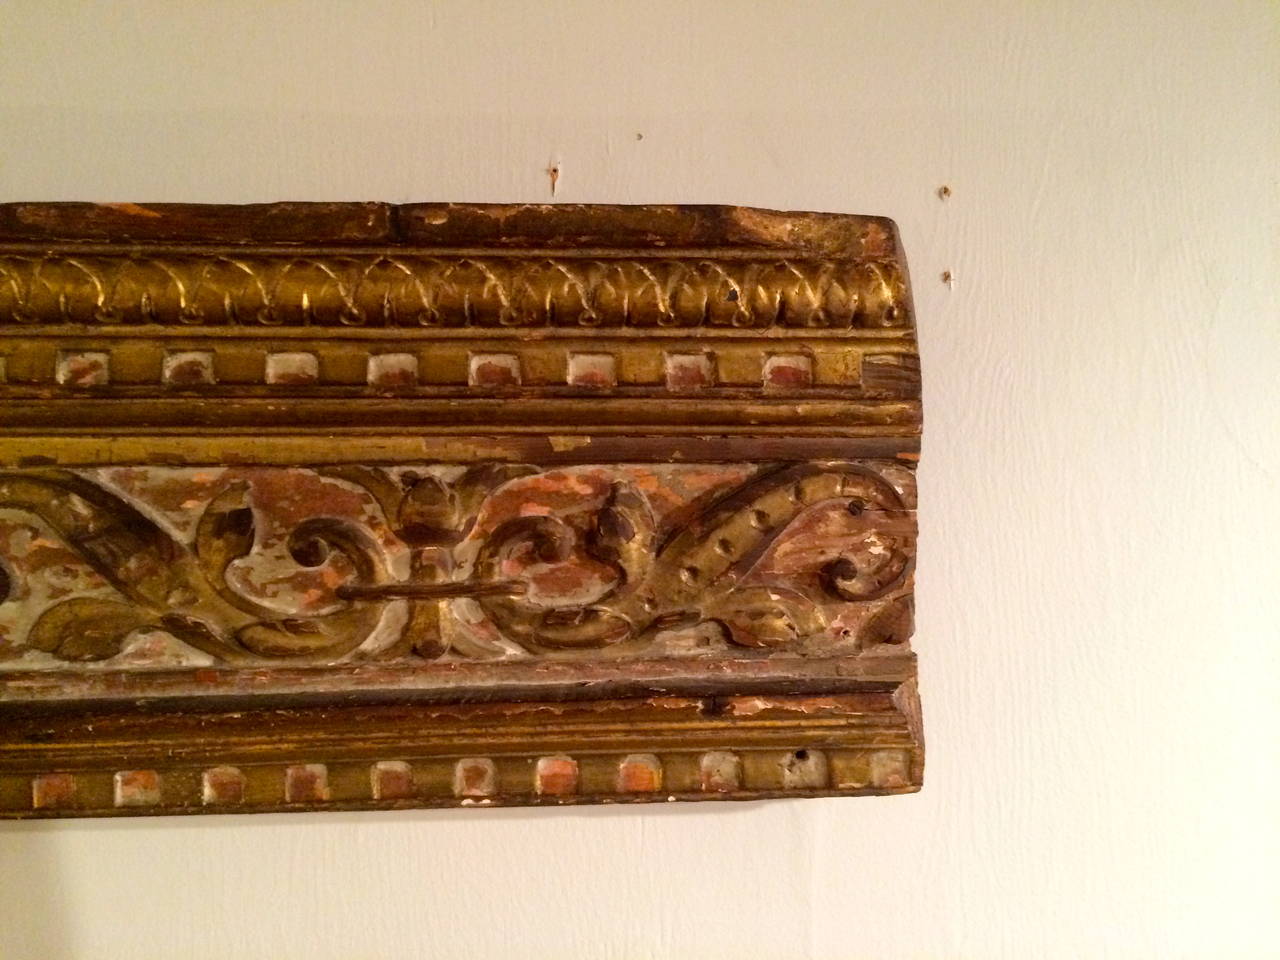 18th century Italian giltwood architectural relief carving with carved floral arabesques, acanthus leaf molding above, dentilated molding above and below. A fine piece of carving with traces of the original reddish paint.

Measures: 37 in / 94 cm